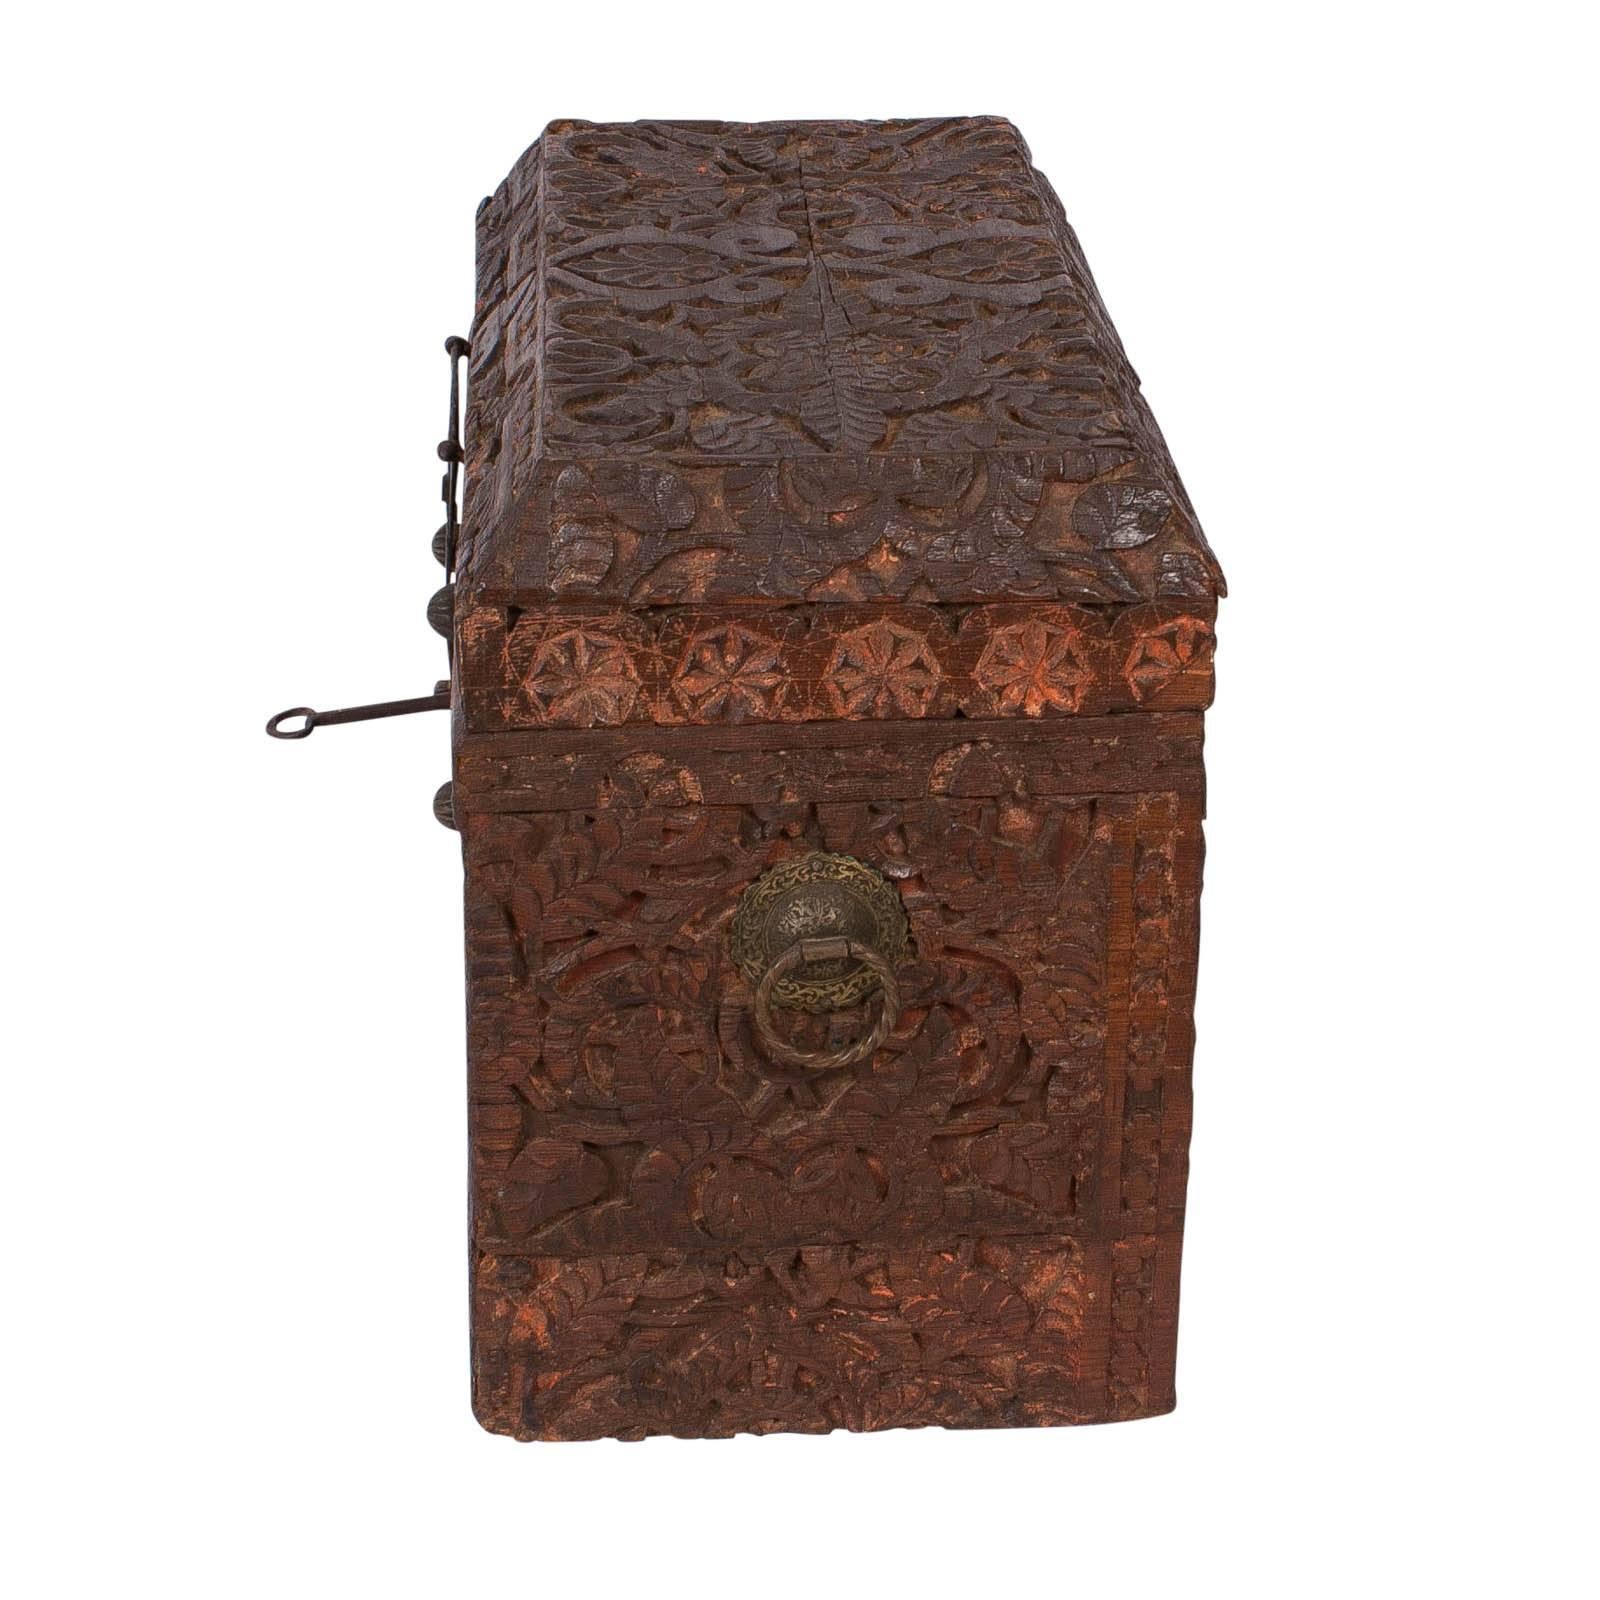 Indian Large Deeply Carved Indo-Persian Trunk, circa 1800